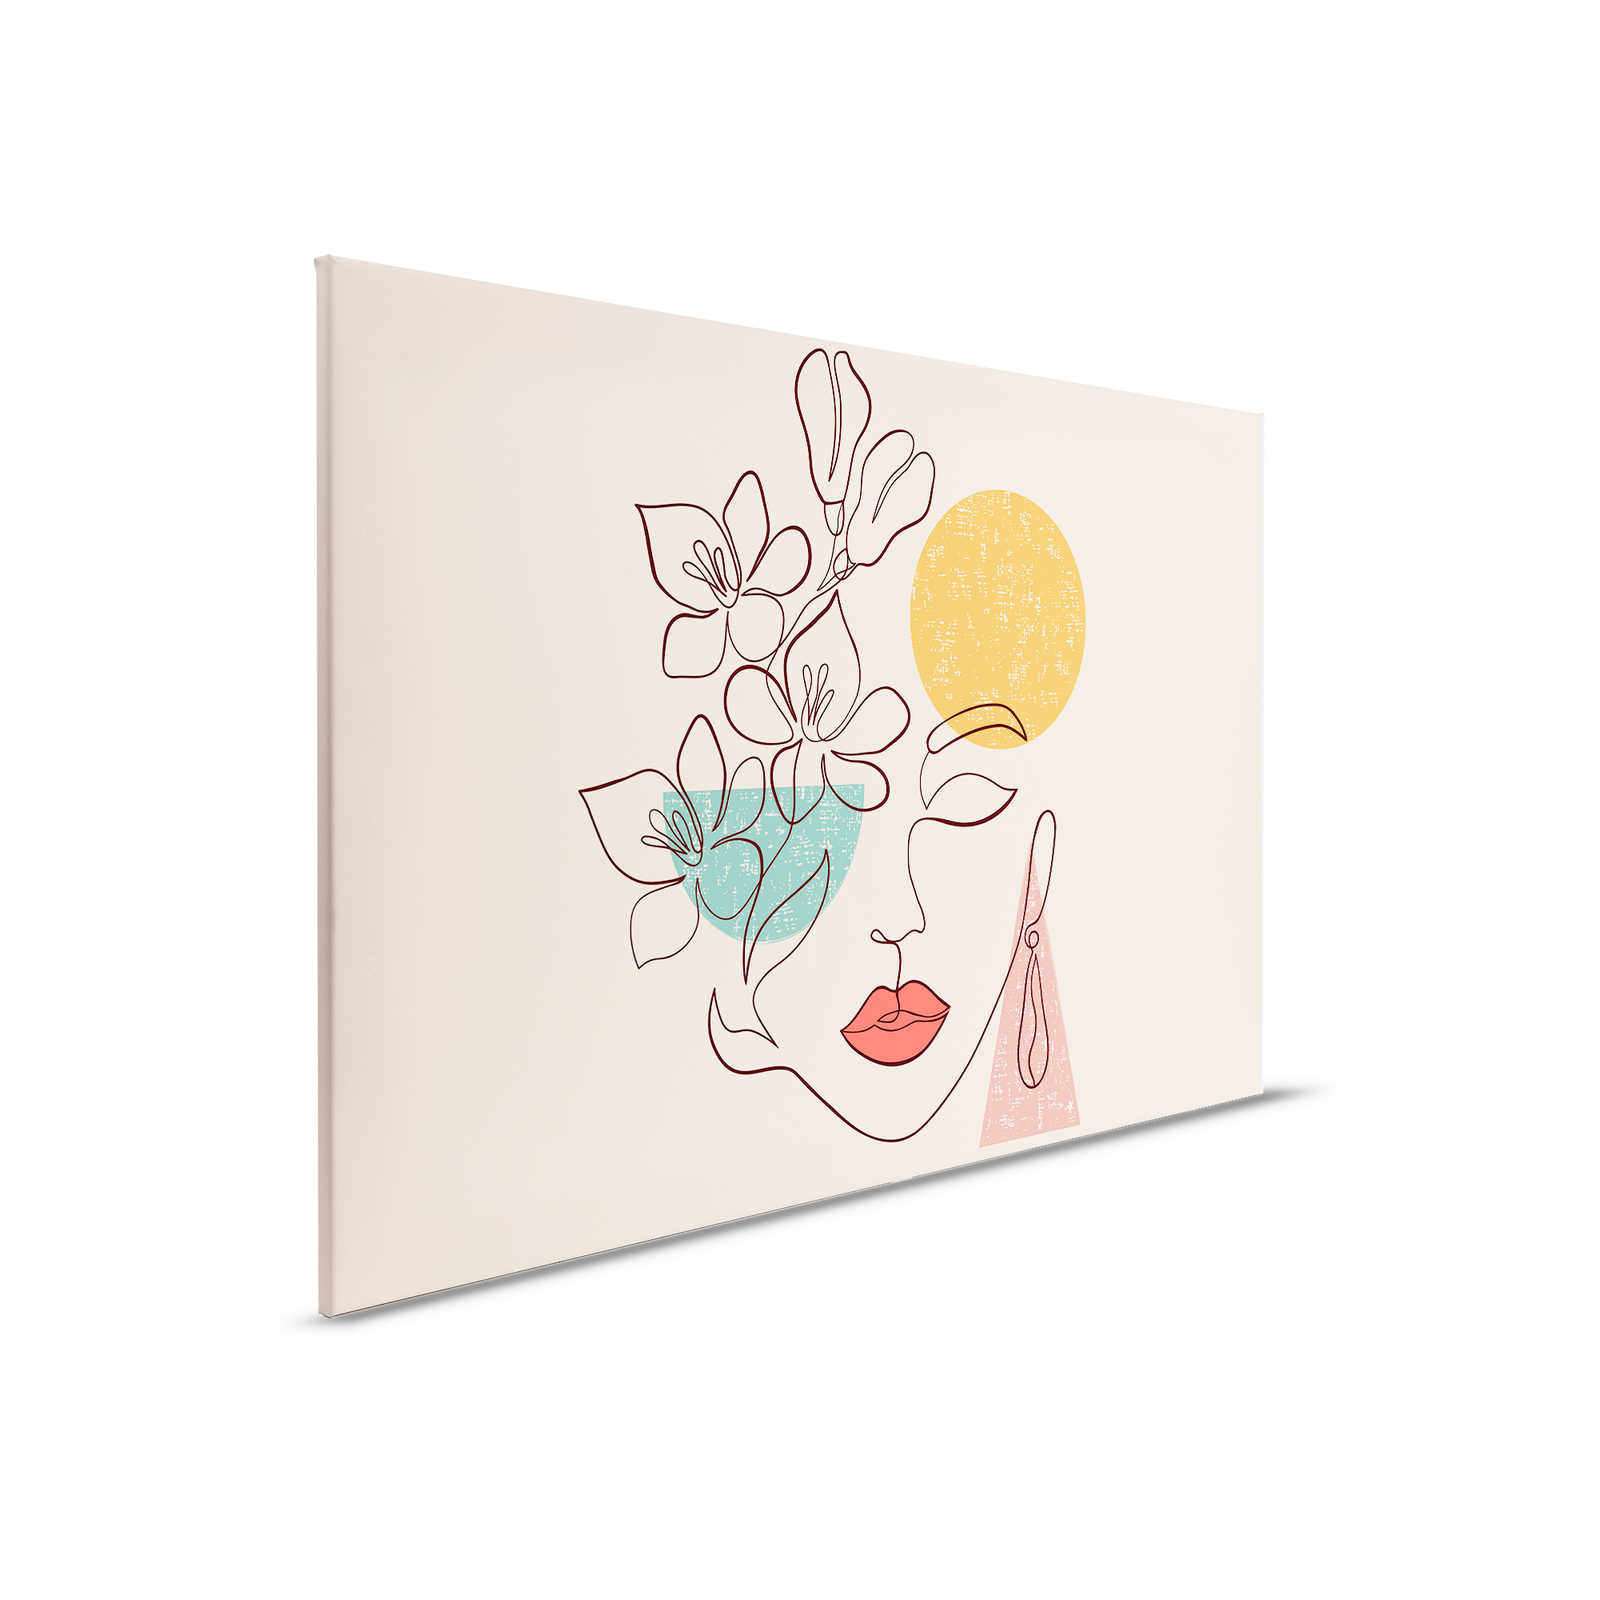         Canvas painting abstract art lady with flowers on her face - 0,90 m x 0,60 m
    